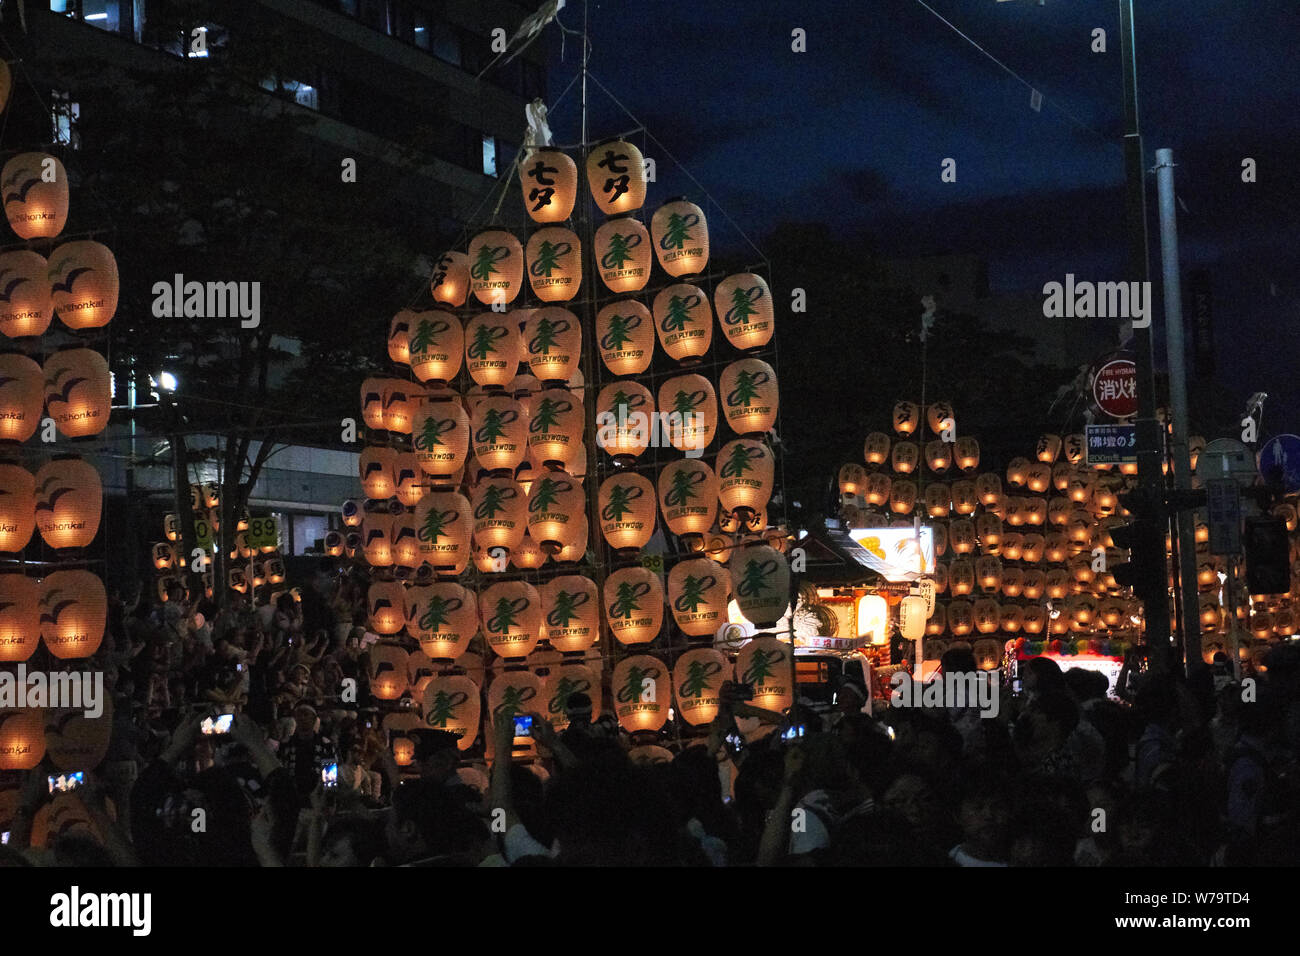 Crowds watch as traditional candlelit Japanese lanterns are raised on bamboo poles and paraded at the Akita Kanto Matsuri Festival in 2016. Stock Photo